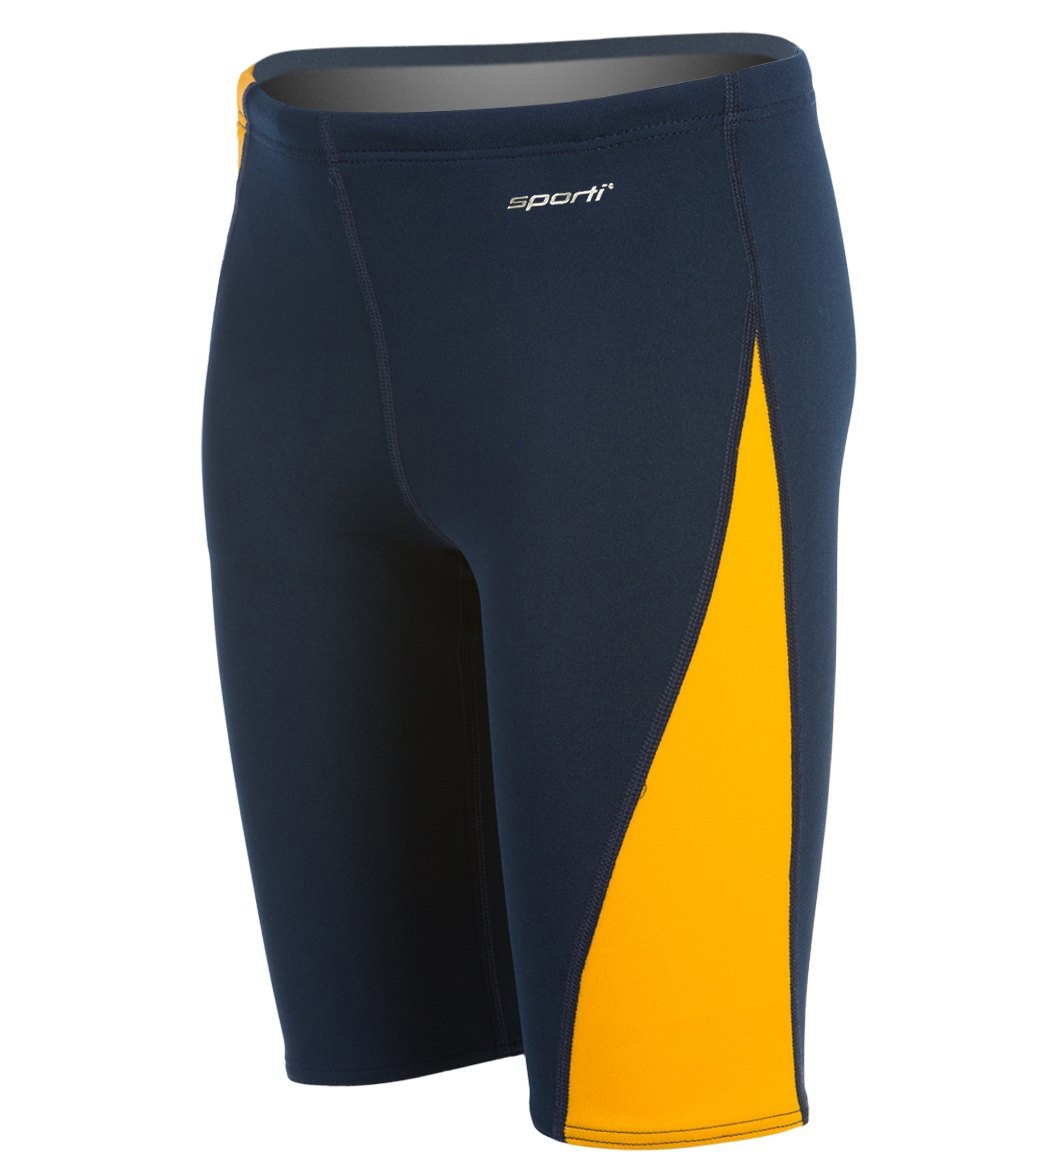 Sporti Poly Pro Splice Jammer Swimsuit Youth 22-28 - Navy/Gold 22Y Polyester/Pbt/Spandex - Swimoutlet.com